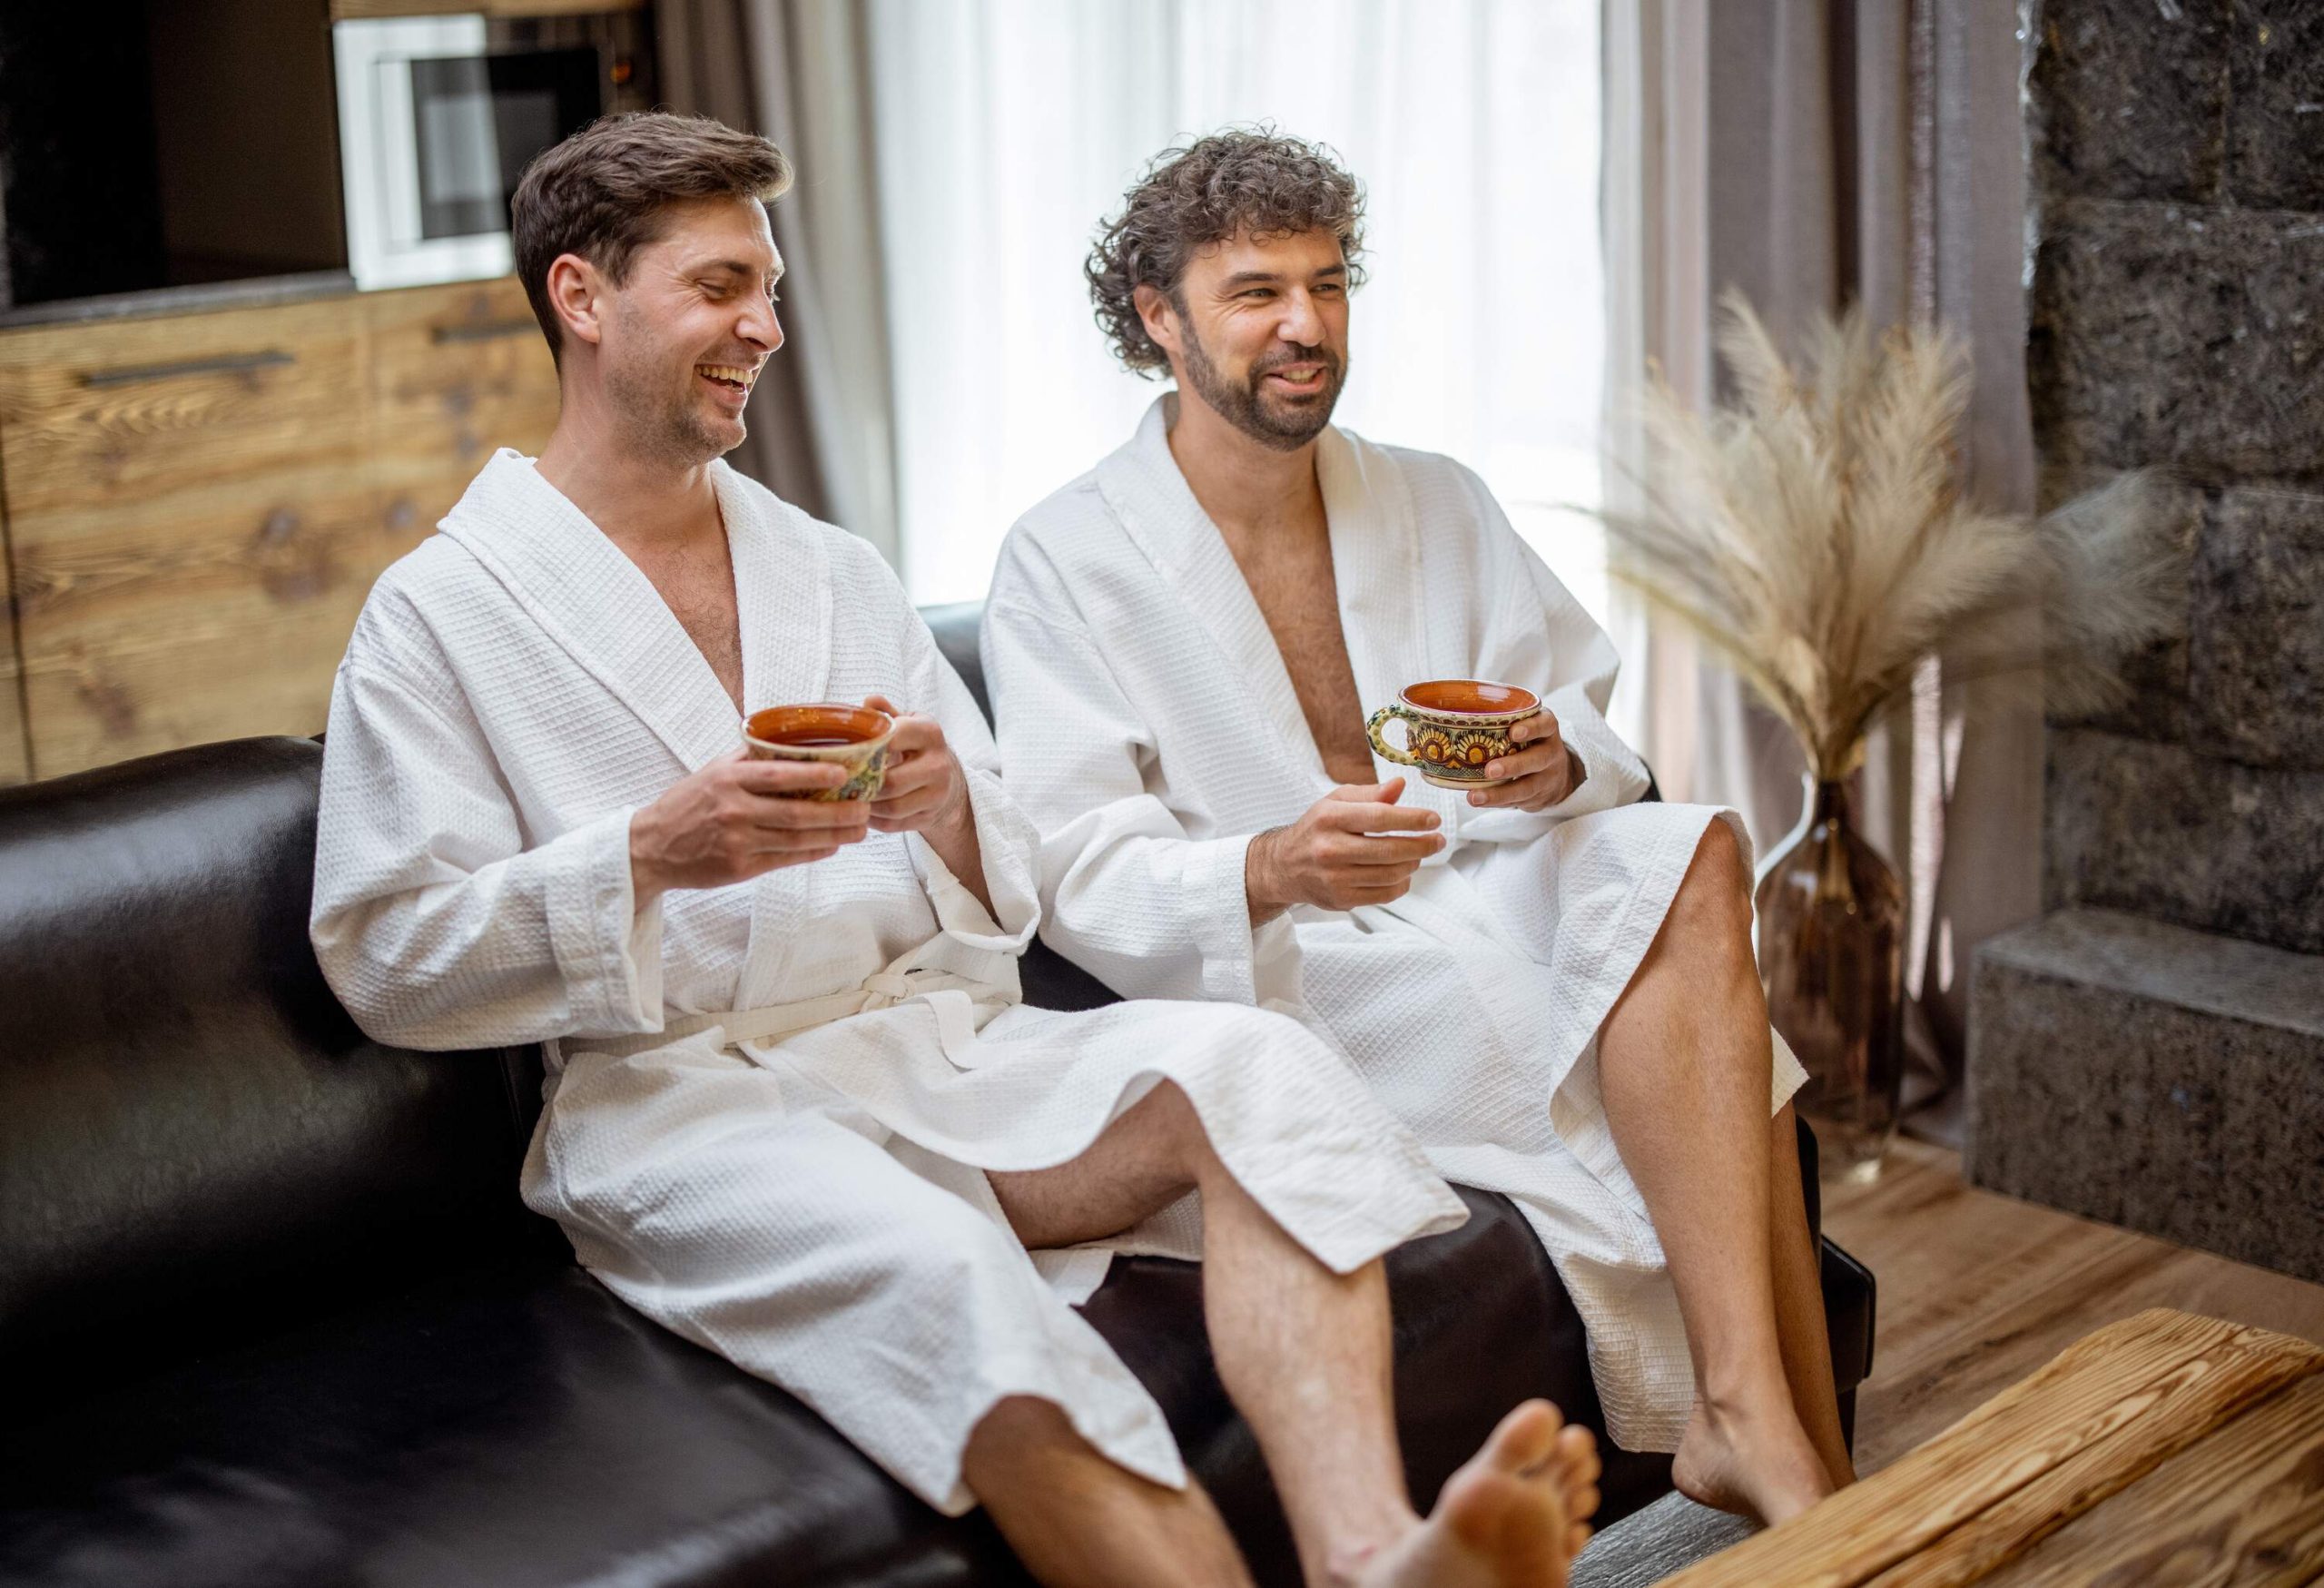 Two men wearing white bathrobes sitting on a leather couch, drinking coffee.